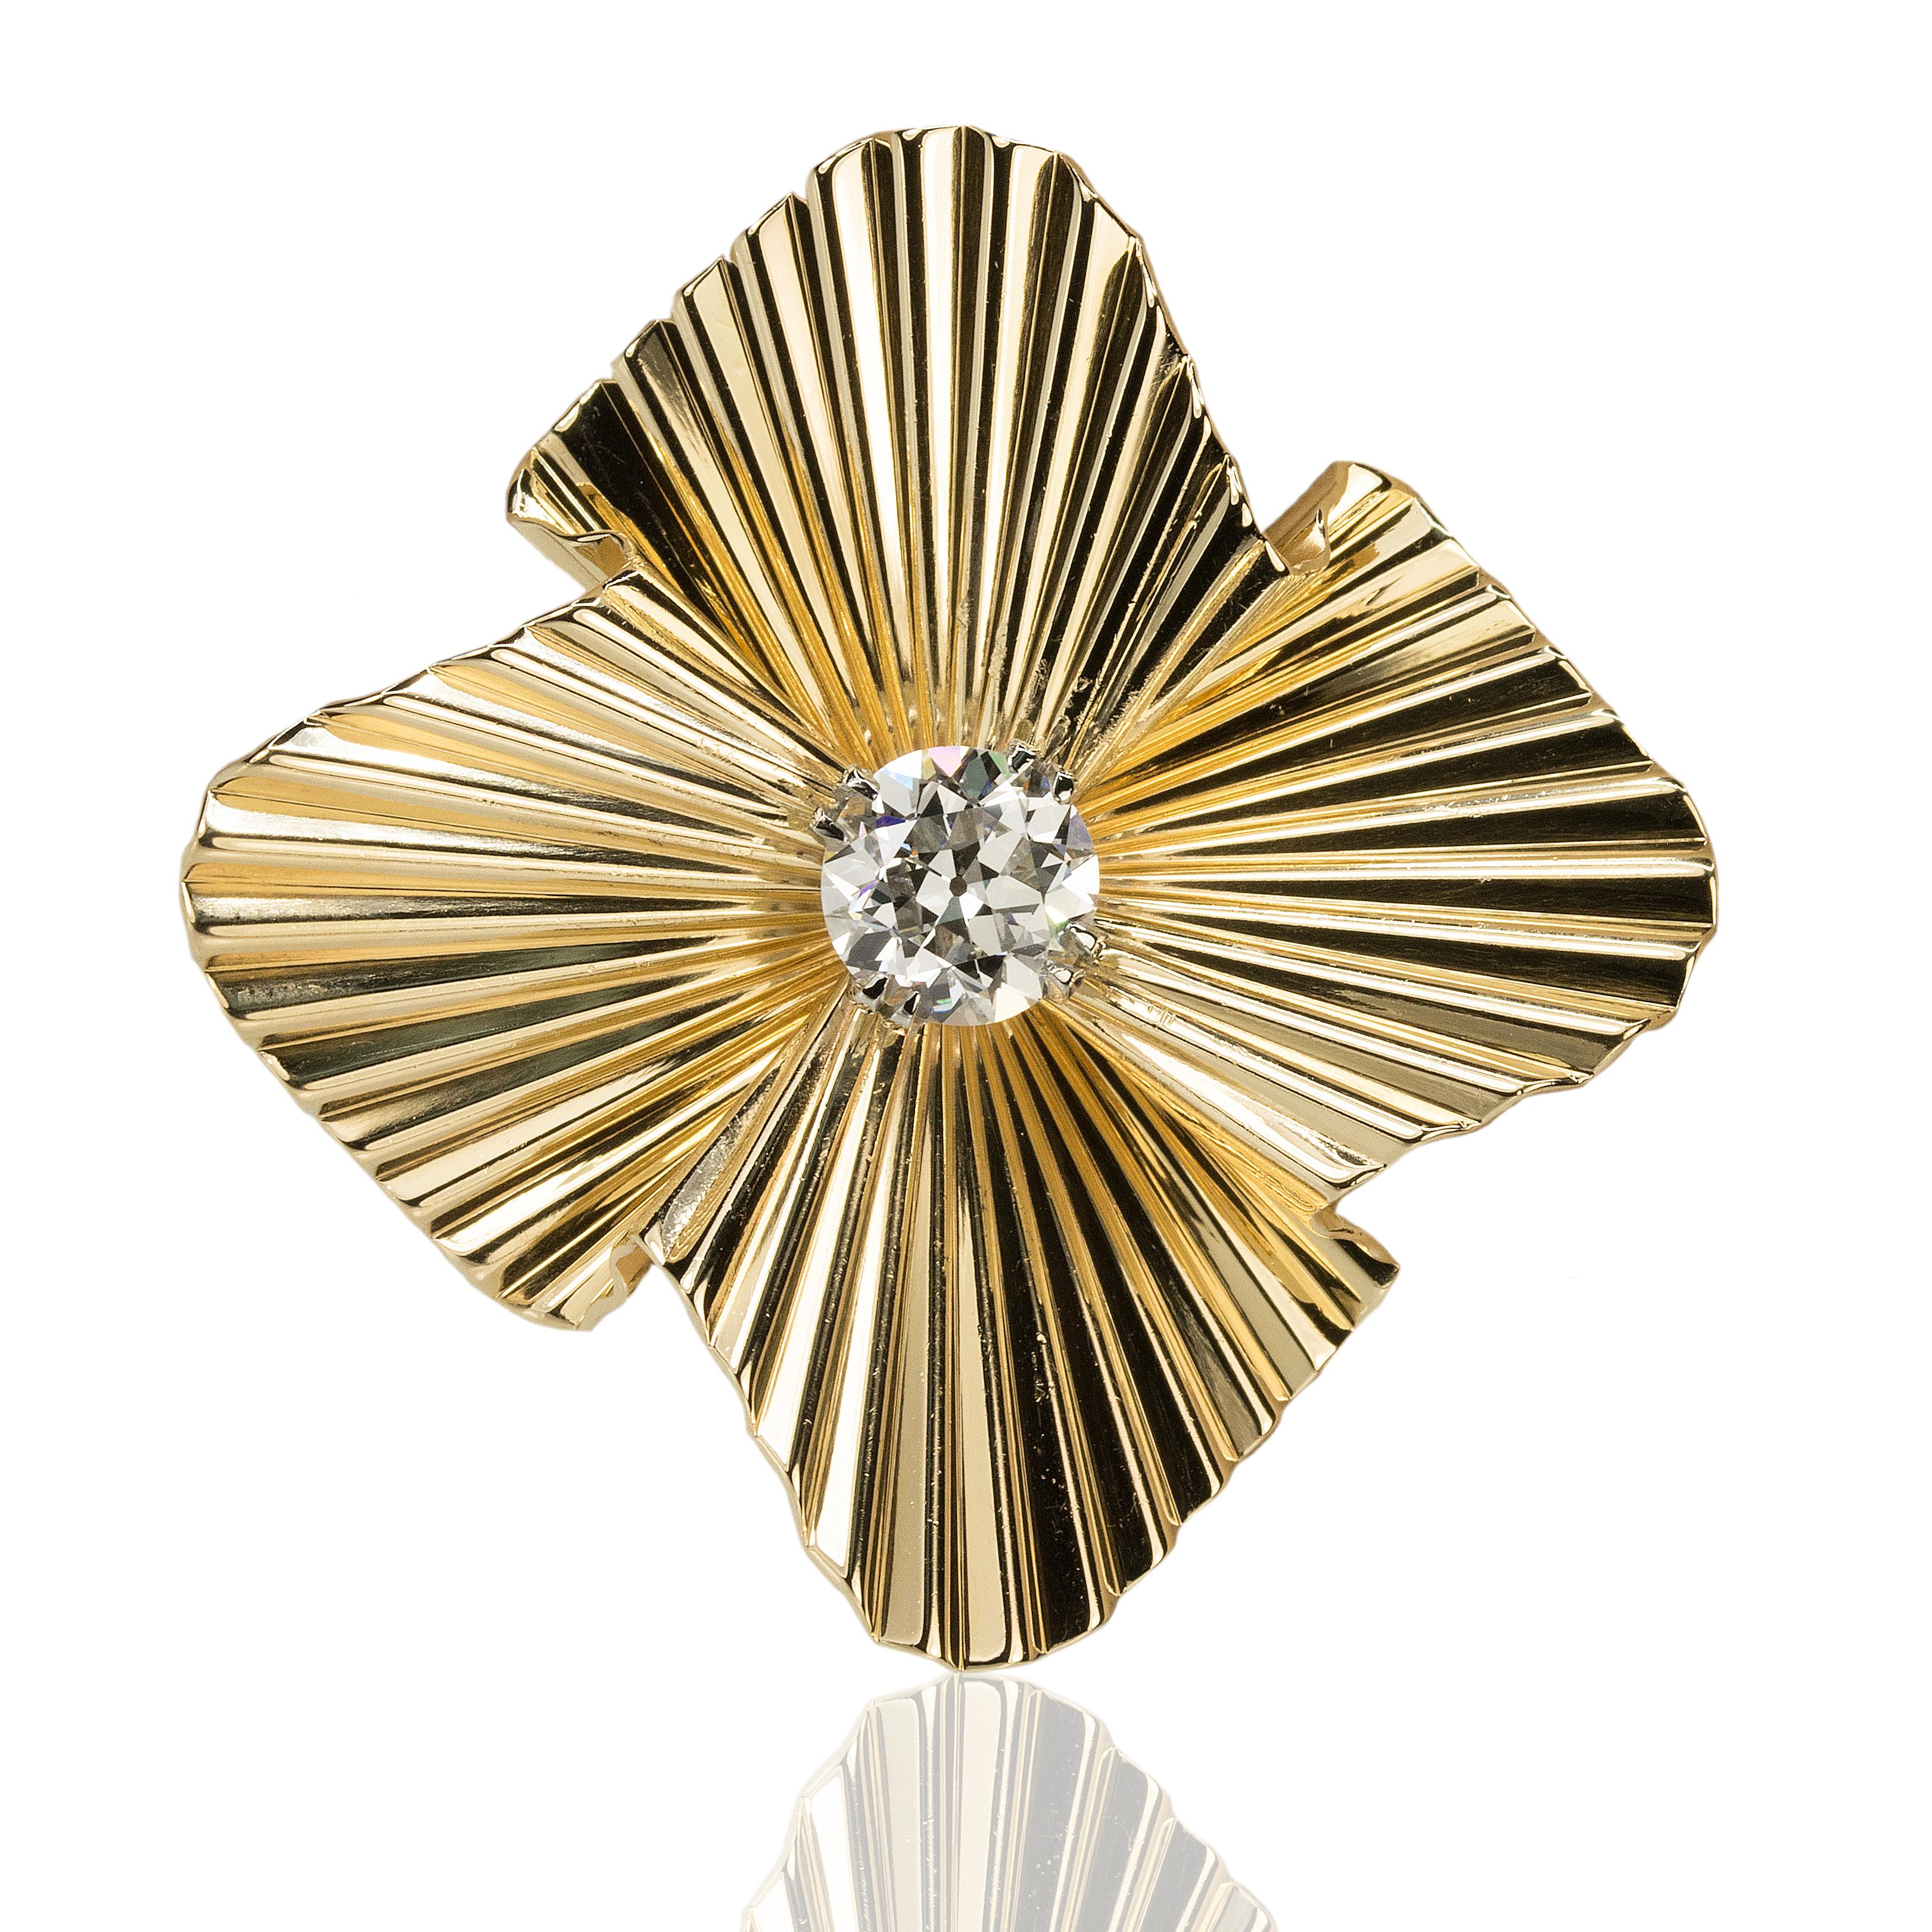 Yellow Gold circa 1950's Retro period Tiffany & Co Fan Brooch with GIA certified K color VS1 clarity 1.74 carat Old European Cut Diamond.